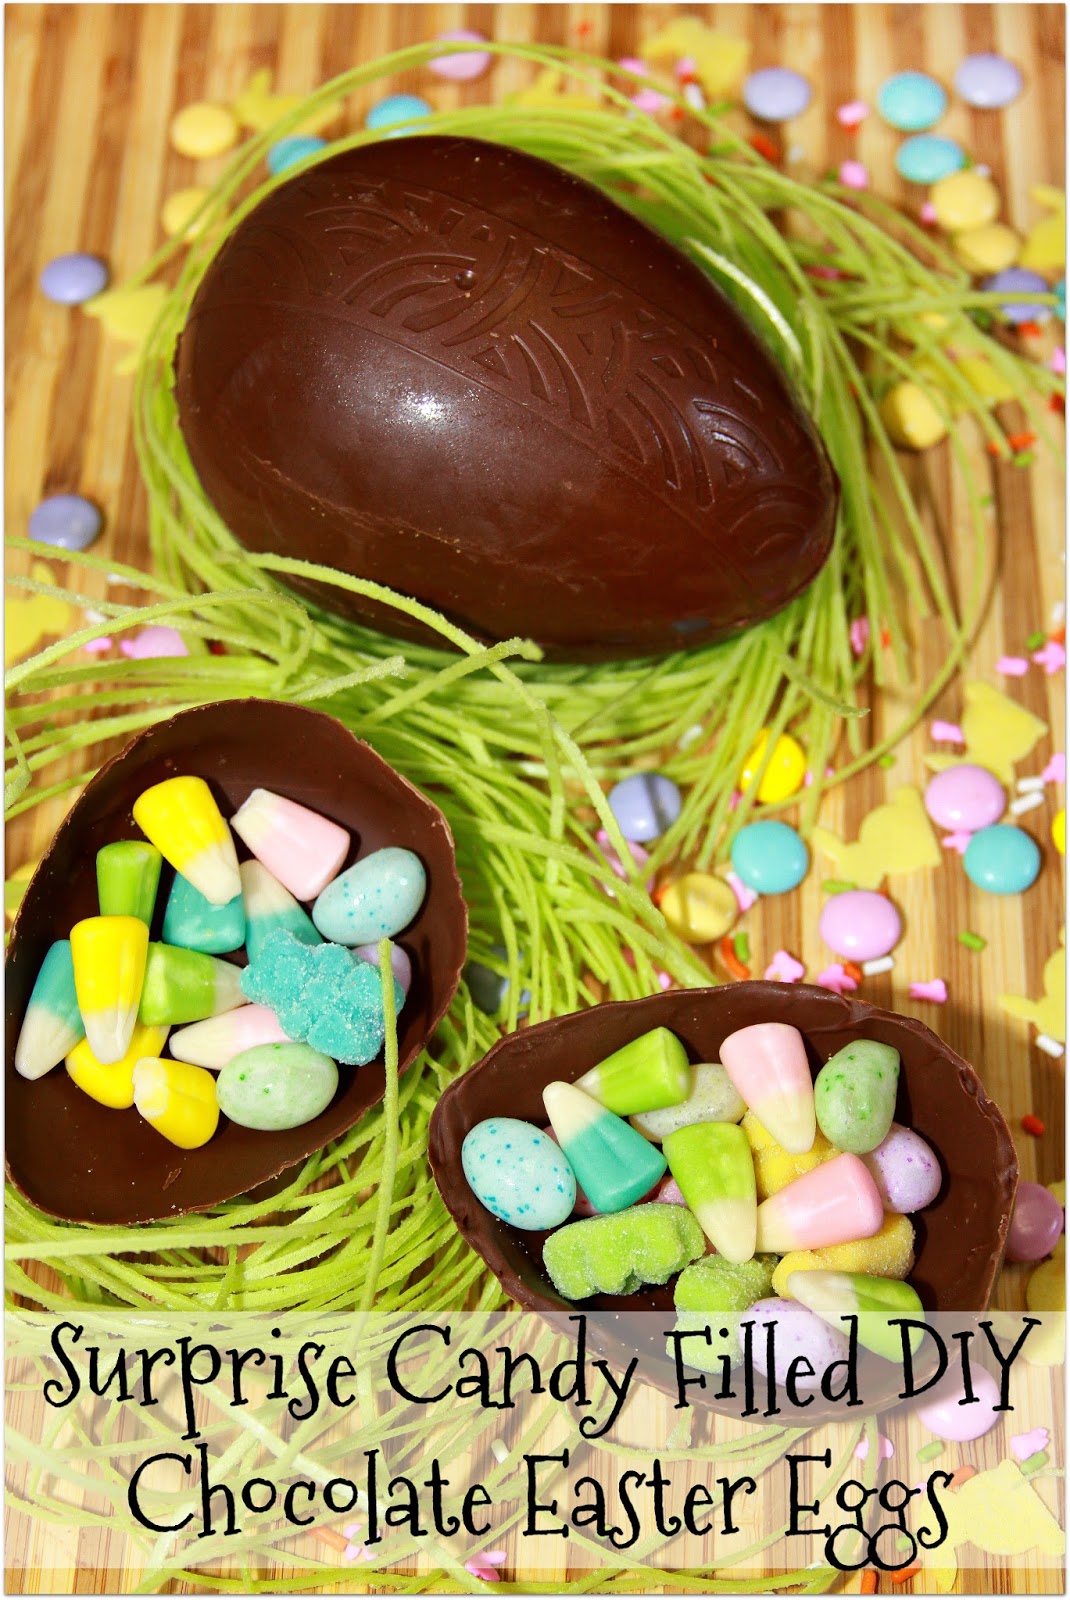 Surprise Candy Filled DIY Chocolate Easter Eggs - For the Love of Food